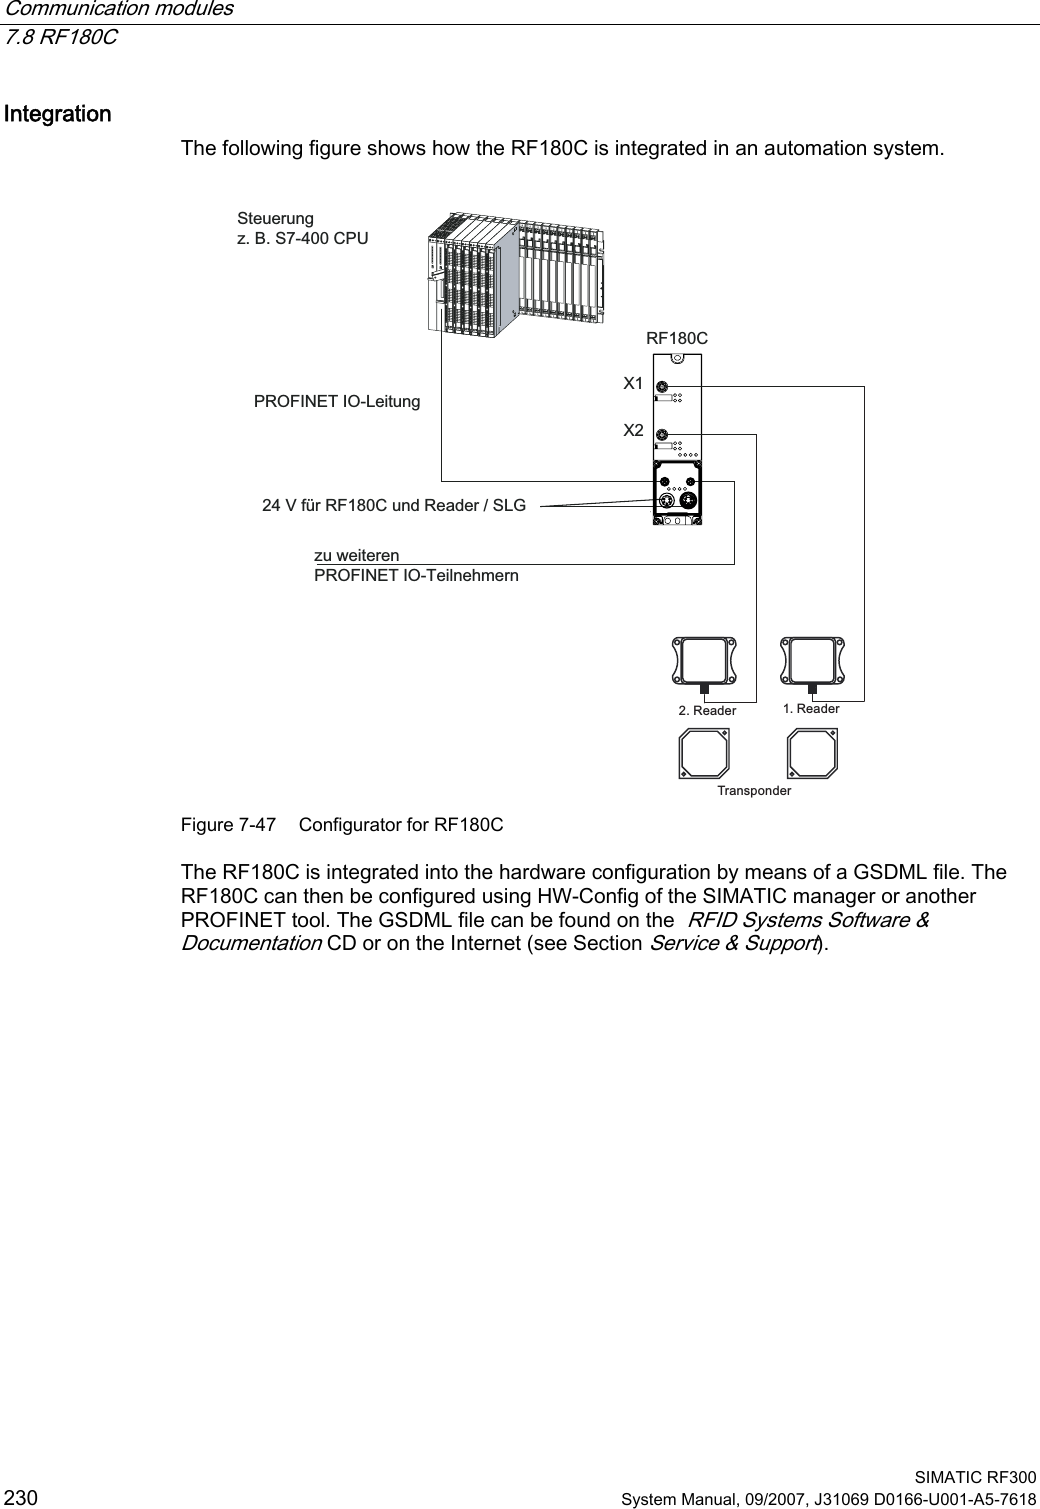 Communication modules   7.8 RF180C  SIMATIC RF300 230 System Manual, 09/2007, J31069 D0166-U001-A5-7618 Integration The following figure shows how the RF180C is integrated in an automation system. 6WHXHUXQJ]%6&amp;38352),1(7,2/HLWXQJ]XZHLWHUHQ352),1(7,27HLOQHKPHUQ9I¾U5)&amp;XQG5HDGHU6/*5HDGHU 5HDGHU7UDQVSRQGHU;;5)&amp; Figure 7-47  Configurator for RF180C The RF180C is integrated into the hardware configuration by means of a GSDML file. The RF180C can then be configured using HW-Config of the SIMATIC manager or another PROFINET tool. The GSDML file can be found on the  RFID Systems Software &amp; Documentation CD or on the Internet (see Section Service &amp; Support). 